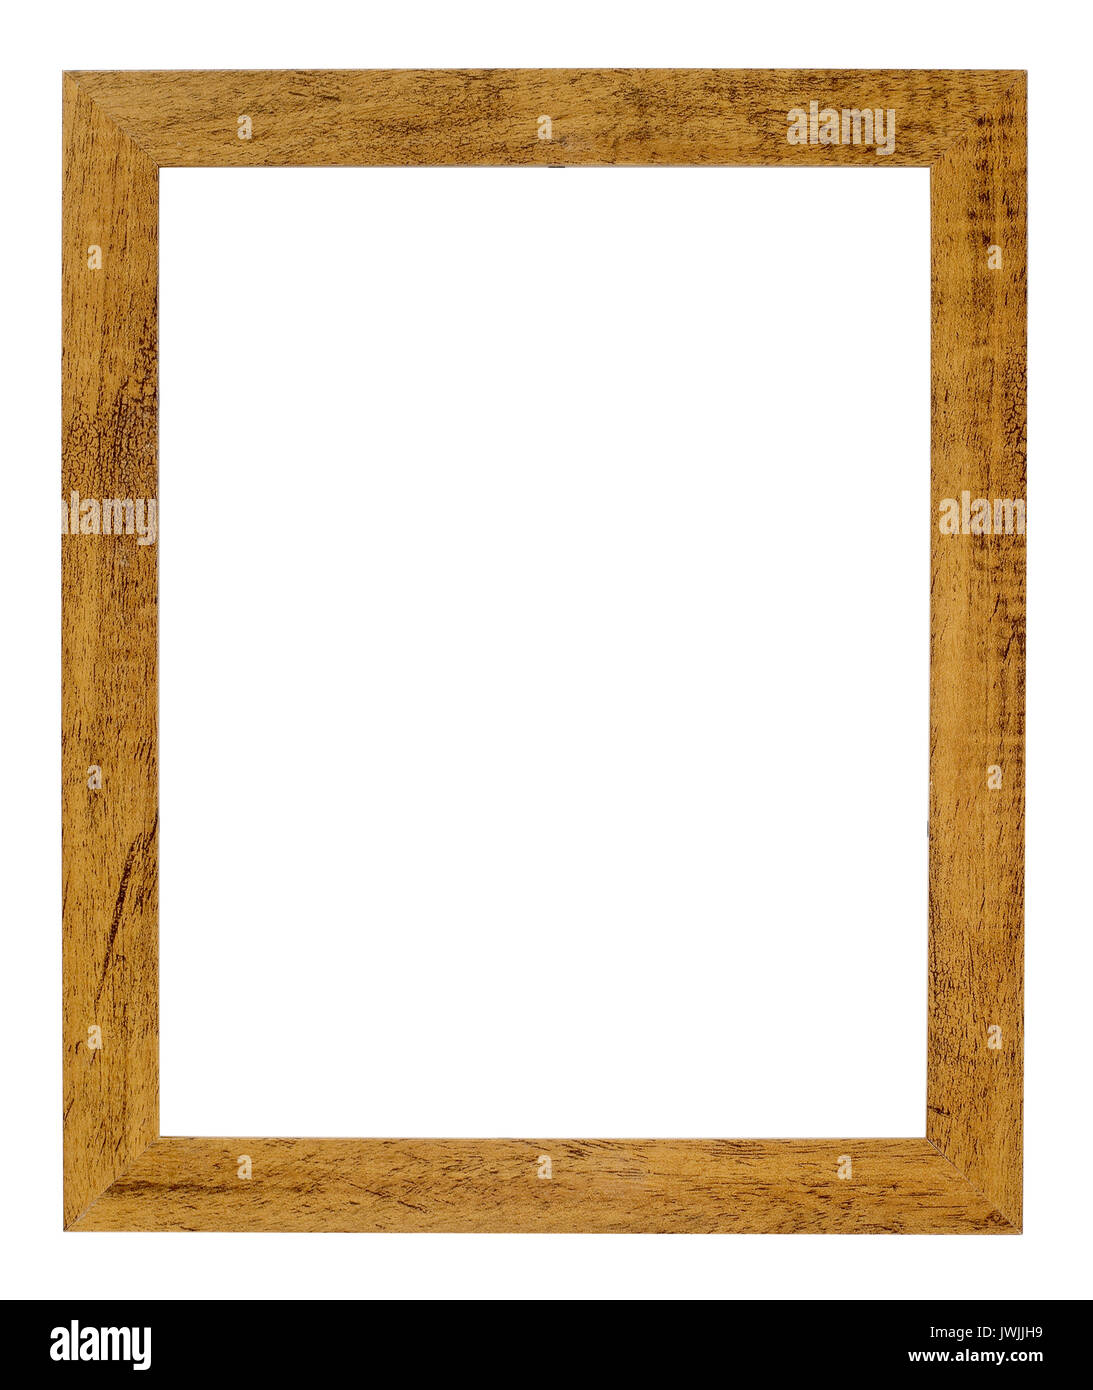 Natural wood Picture frame Stock Photo